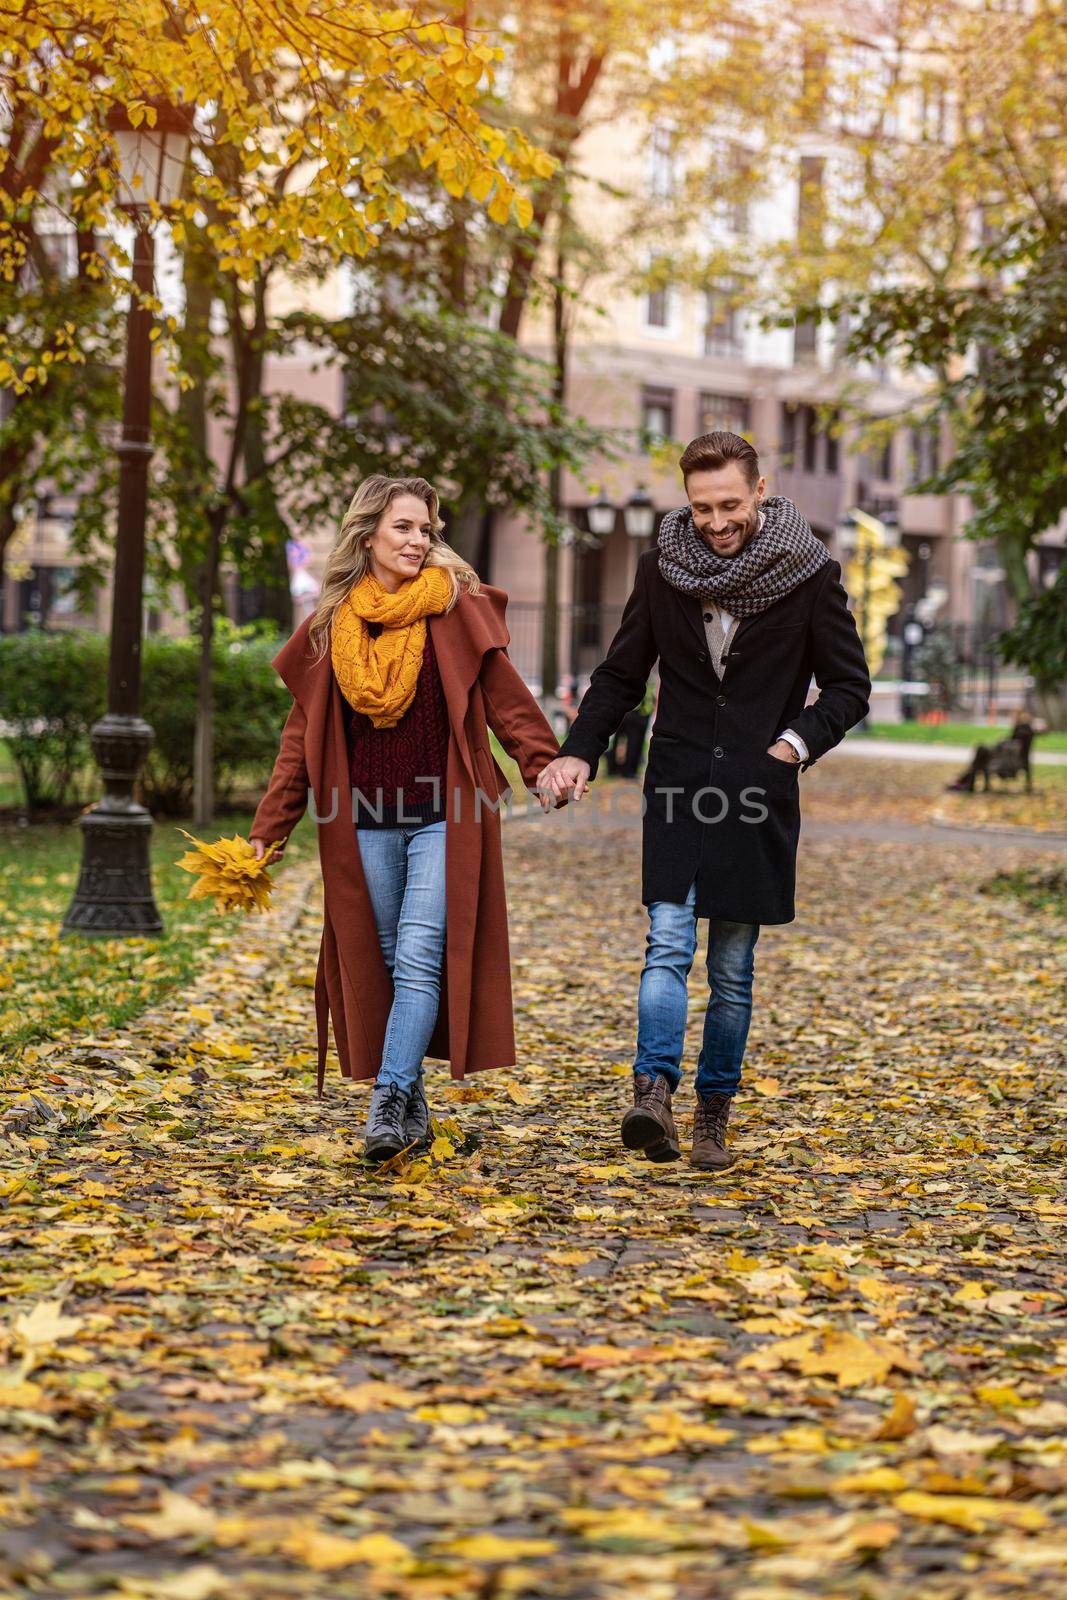 In love couple walking in the autumn park holding hands. Outdoor shot of a young couple in love walking along a path through a autumn park. Tinted image.